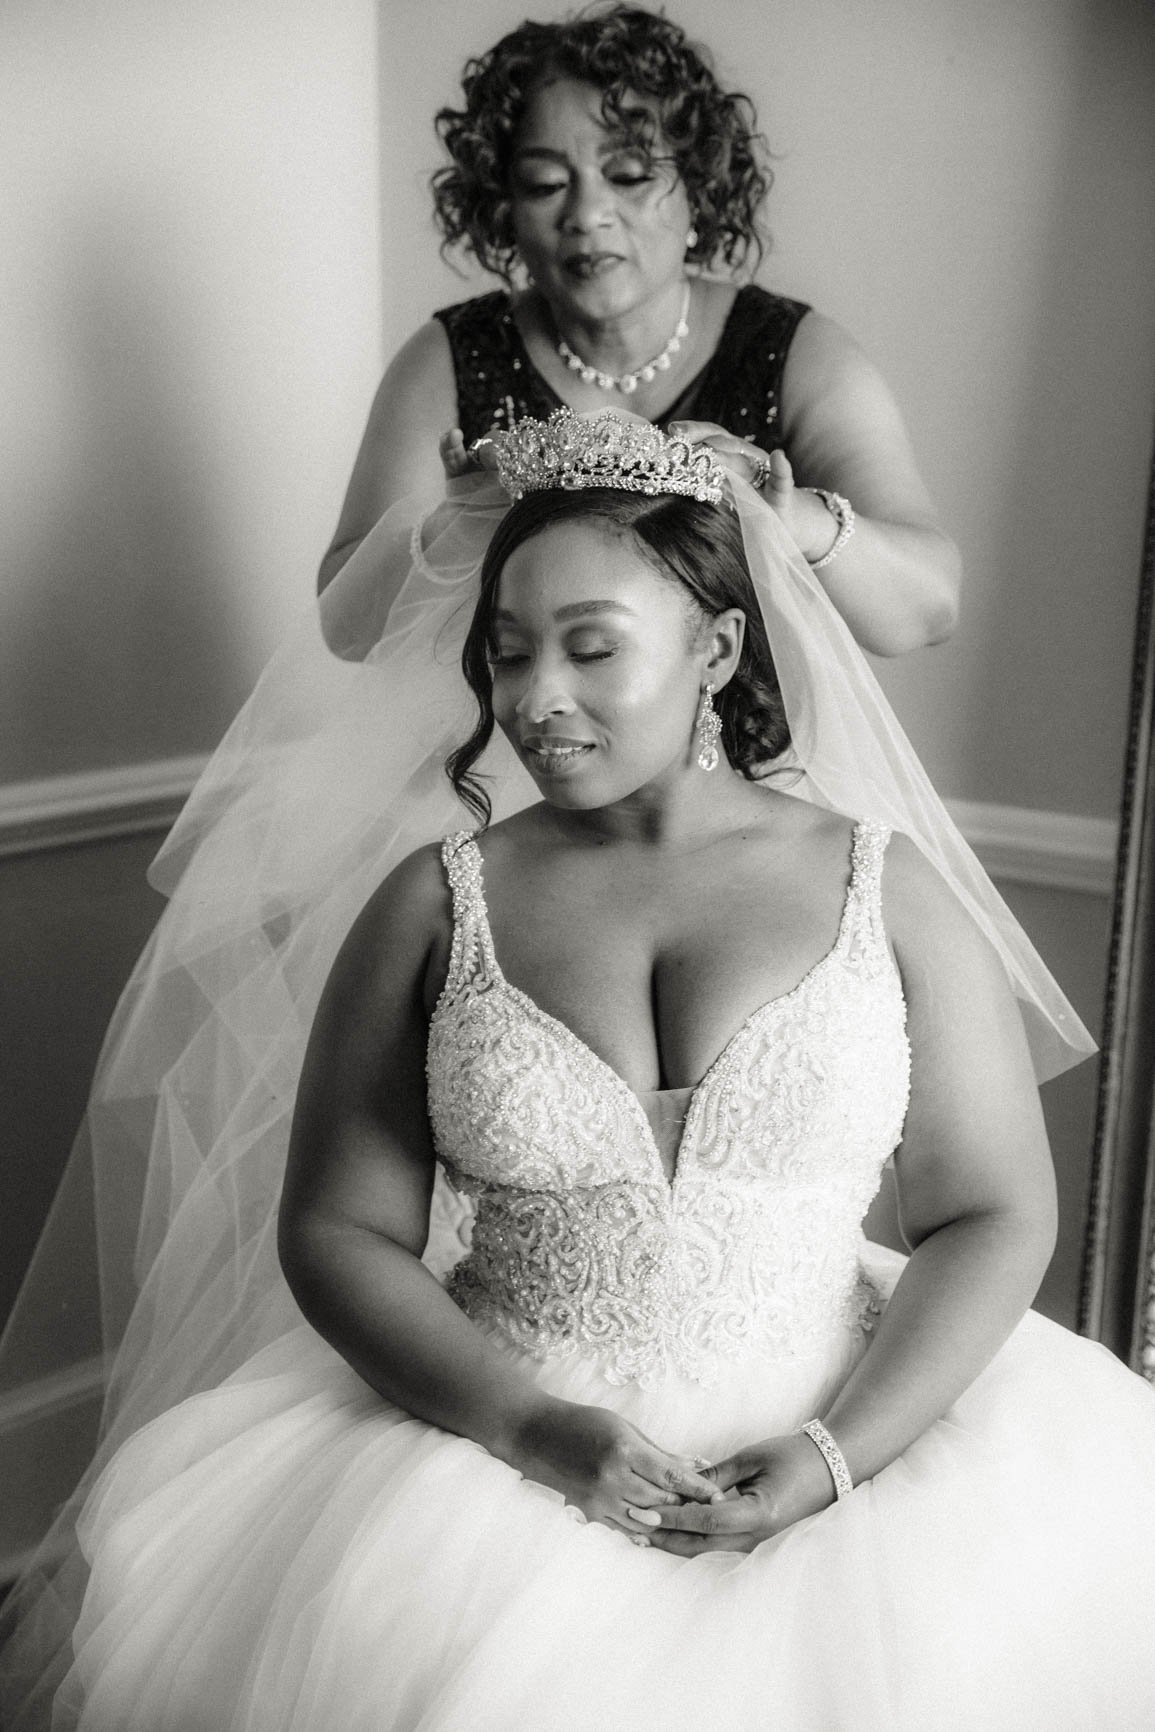 mom final touches bride's wedding veil at Separk Mansion in Gastonia NC shot by Nhieu Tang Photography | nhieutang.com